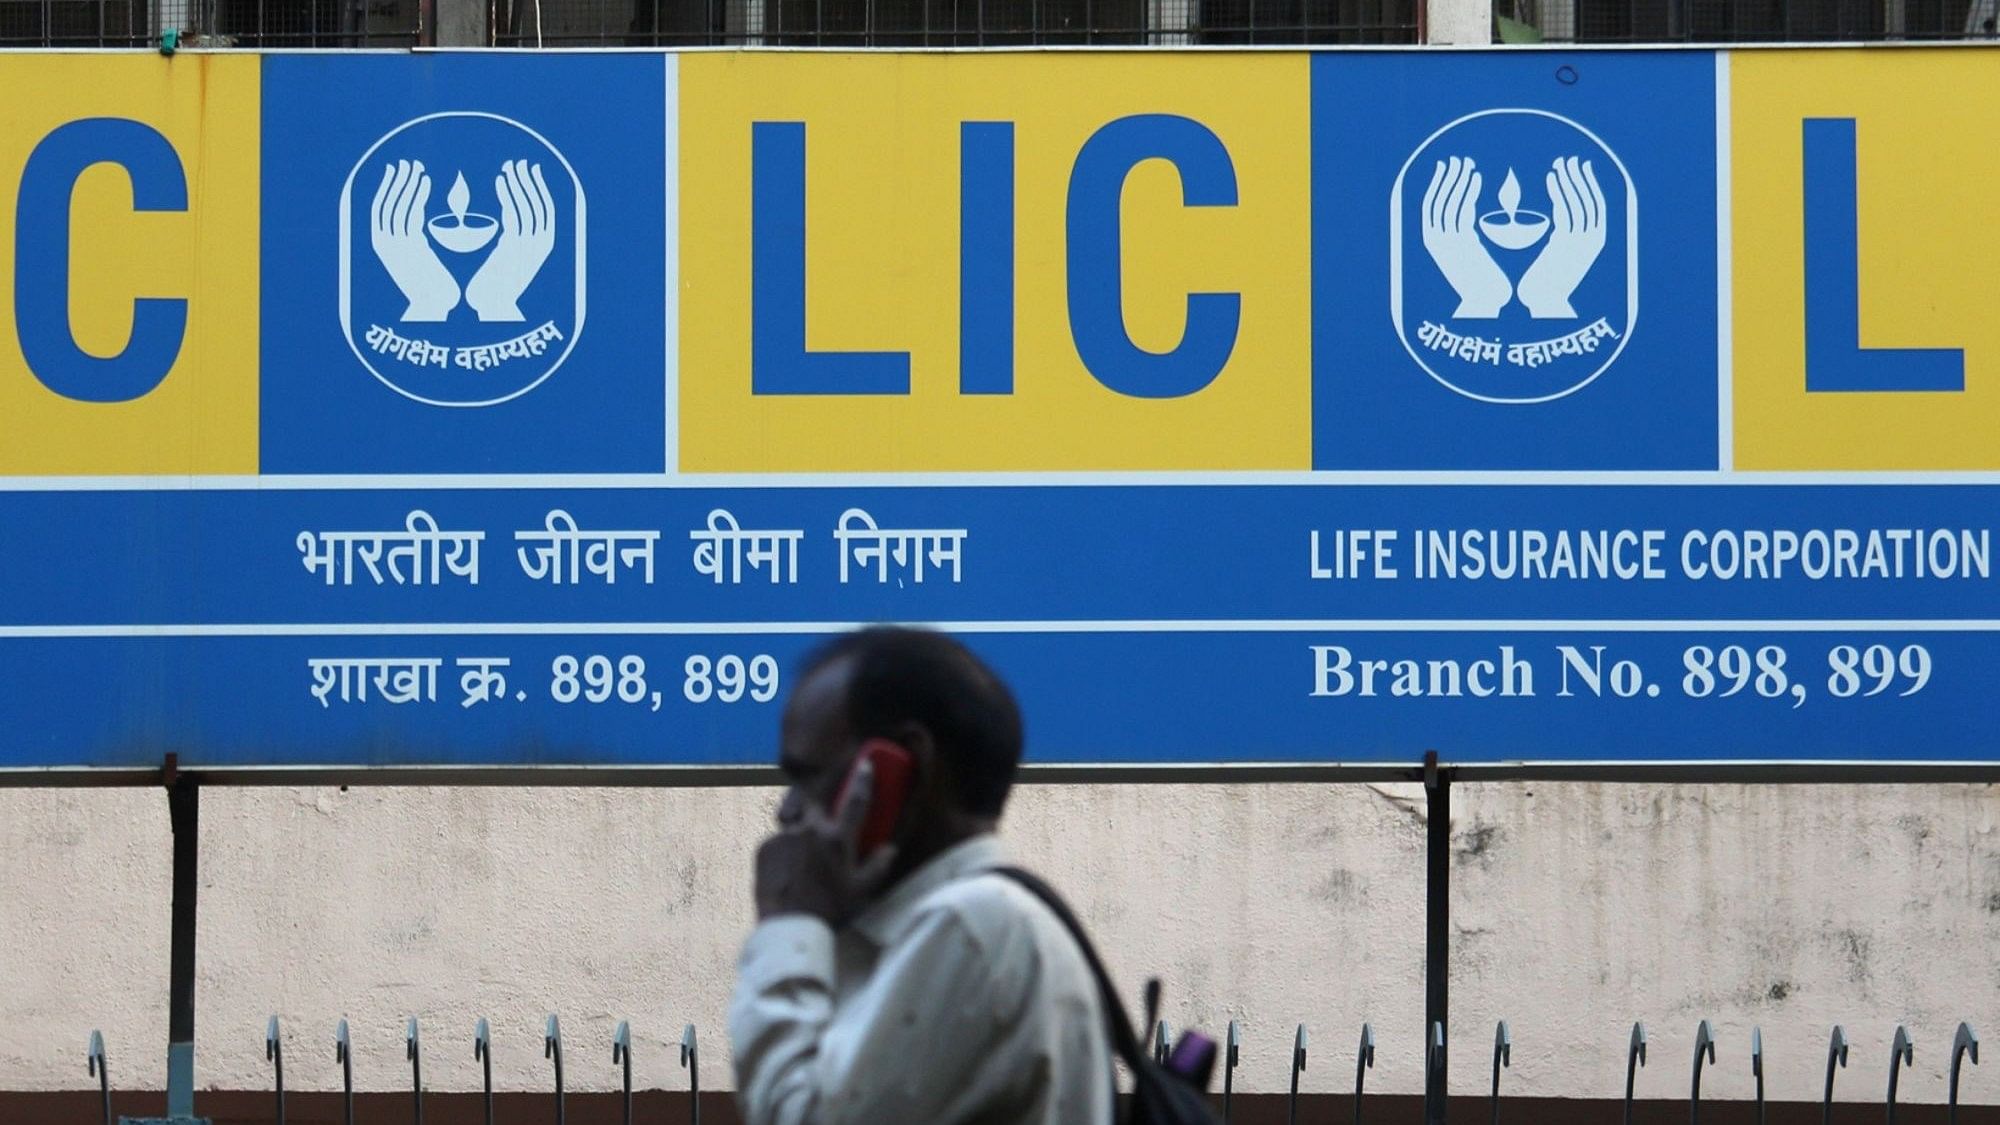 Authorities and executives are leaving no stone unturned in trying to ensure Life Insurance Corp. of India’s record initial public offering is a success. Credit: Bloomberg Photo